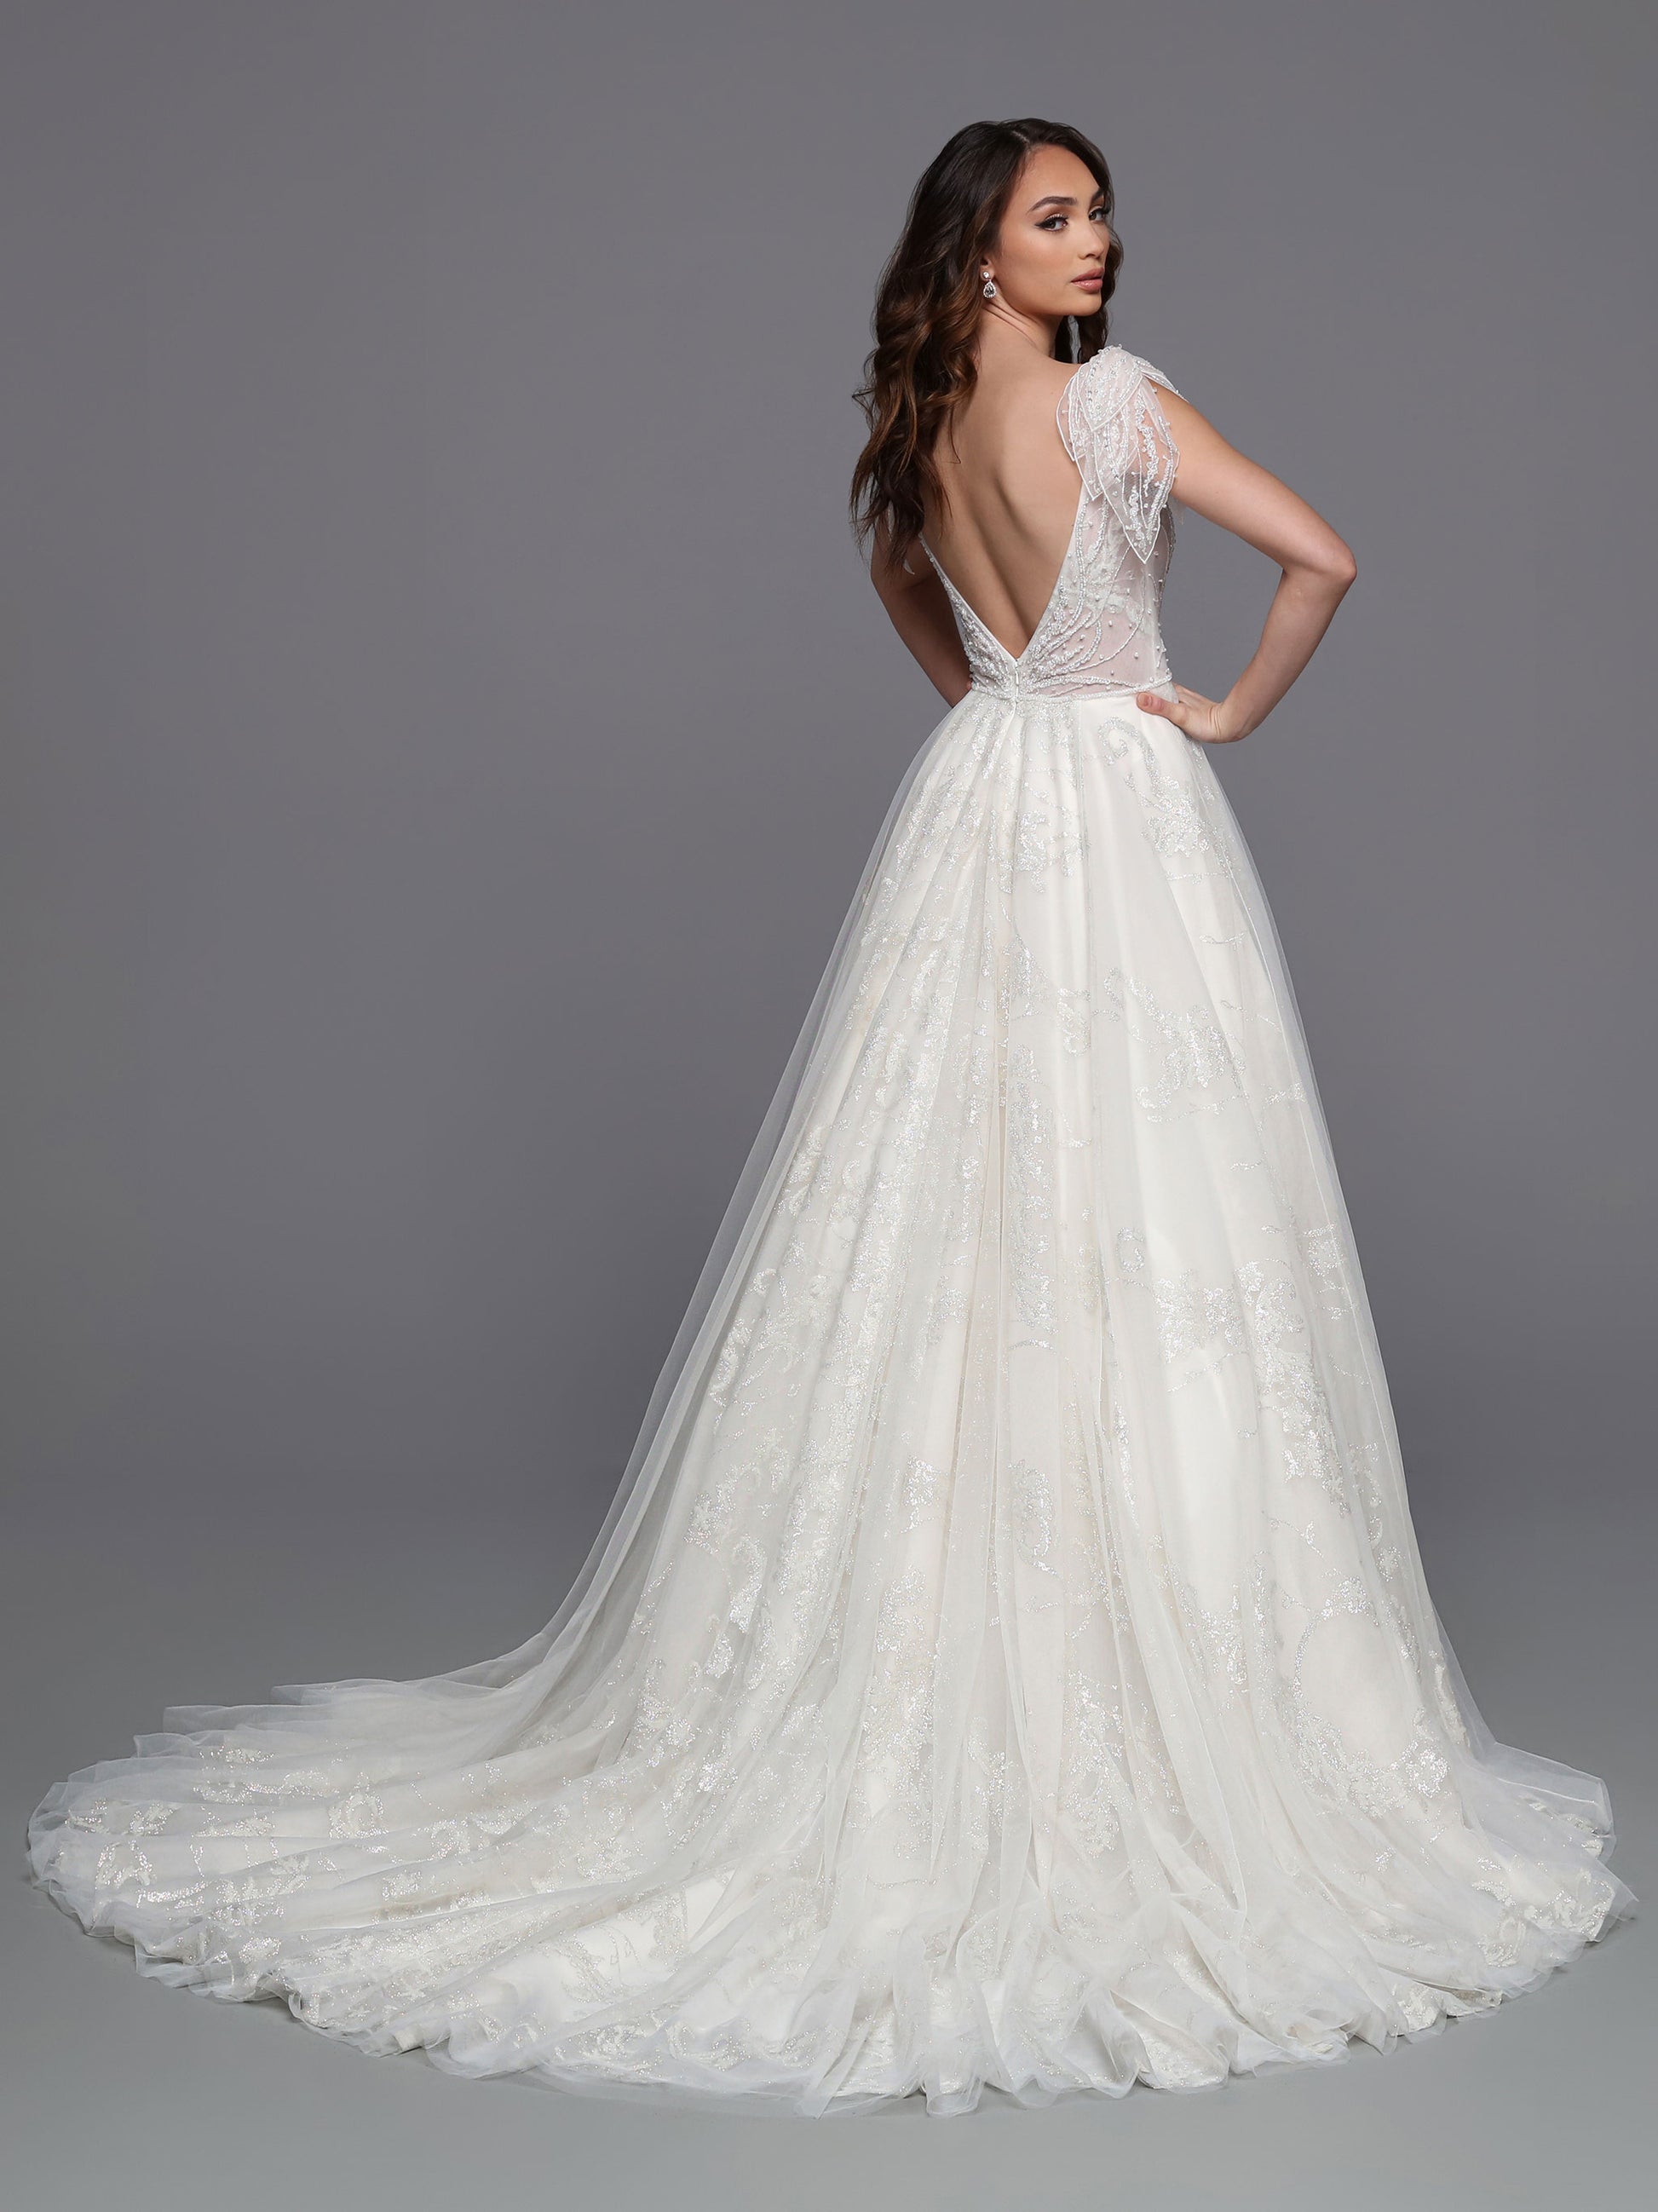 This Davinci Bridal 50718 Long Glitter Beaded Wedding Ballgown Dress is sure to make any bride sparkle. The A-line silhouette features embroidered patterned lace coupled with a beaded tulip-style cap sleeve, creating a sheer yet elegant fairytale look. The layers of tulle combine for an unforgettable wedding dress.  Sizes: 2-20  Colors: Ivory